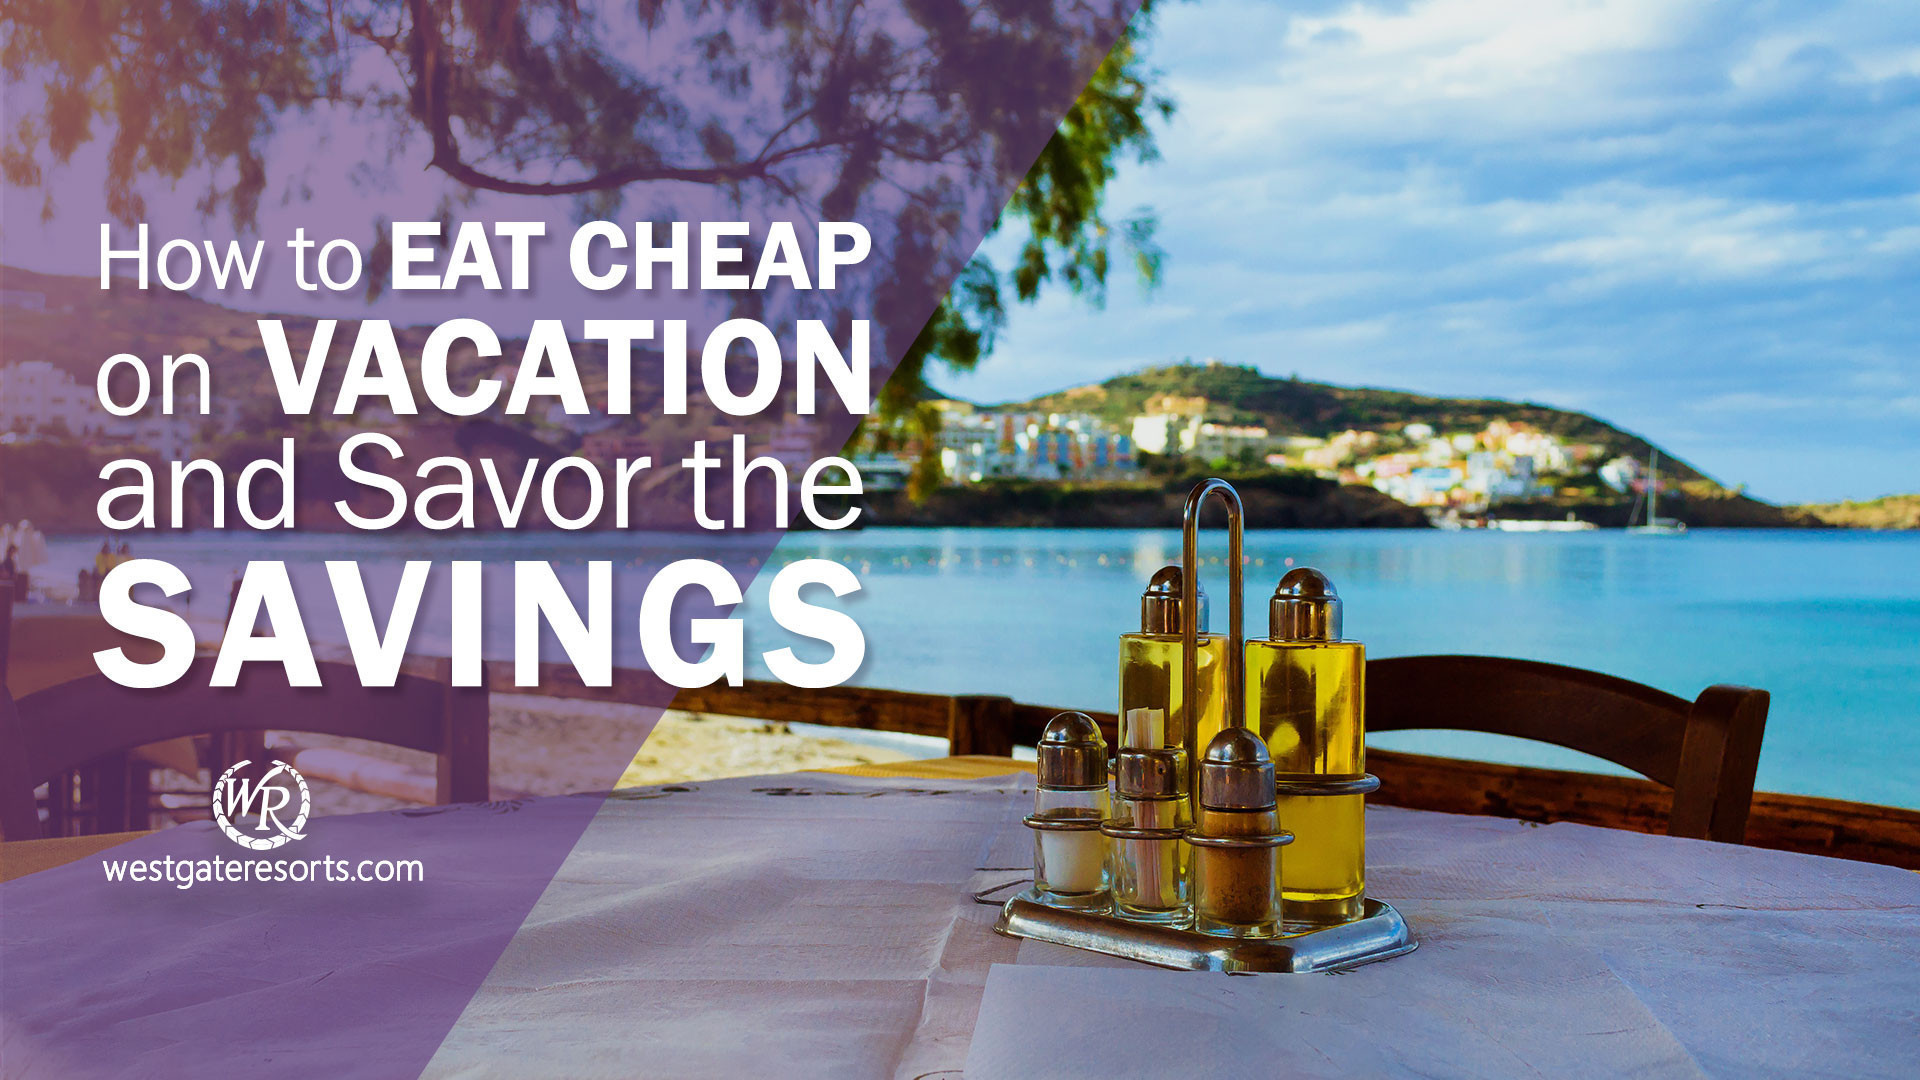 How to Eat Cheap on Vacation and Savor the Savings! | Culinary Travel Tips | Westgate Resorts